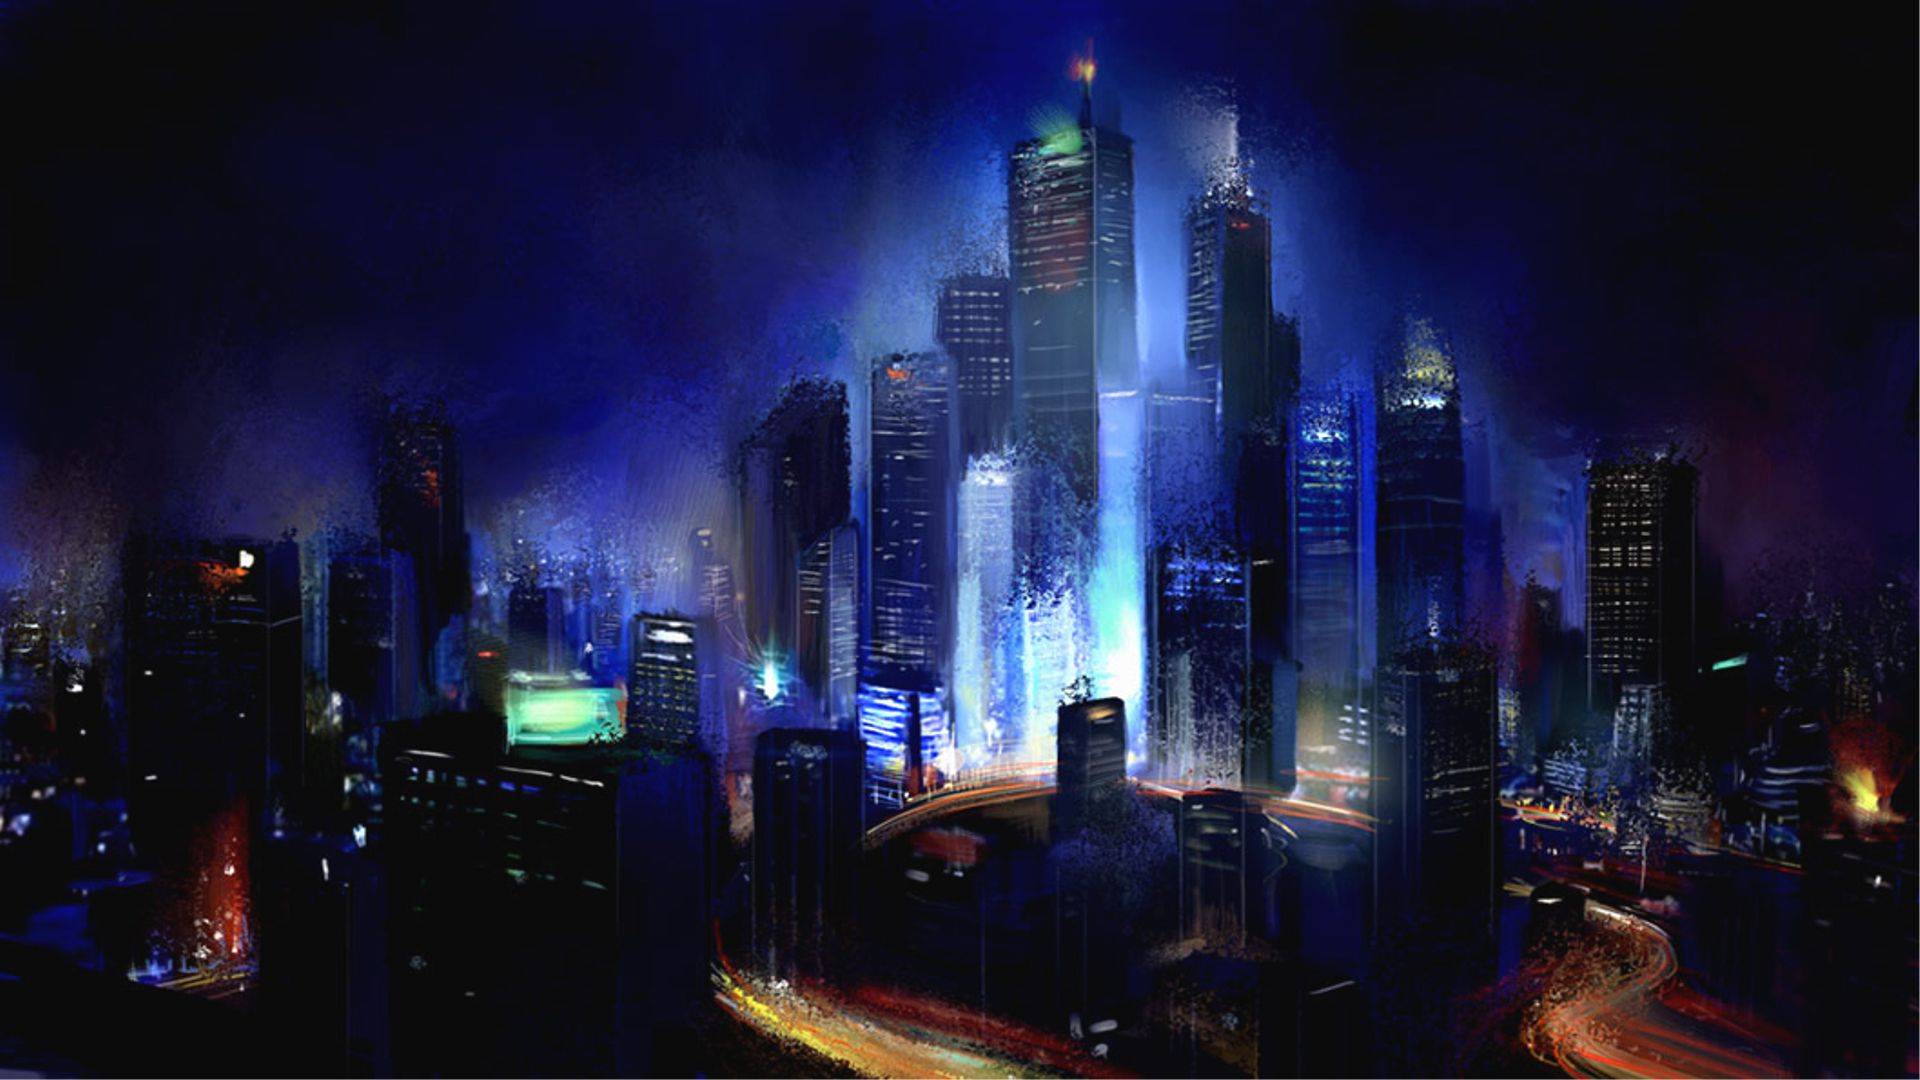 Gallery for - hd wallpaper cityscape